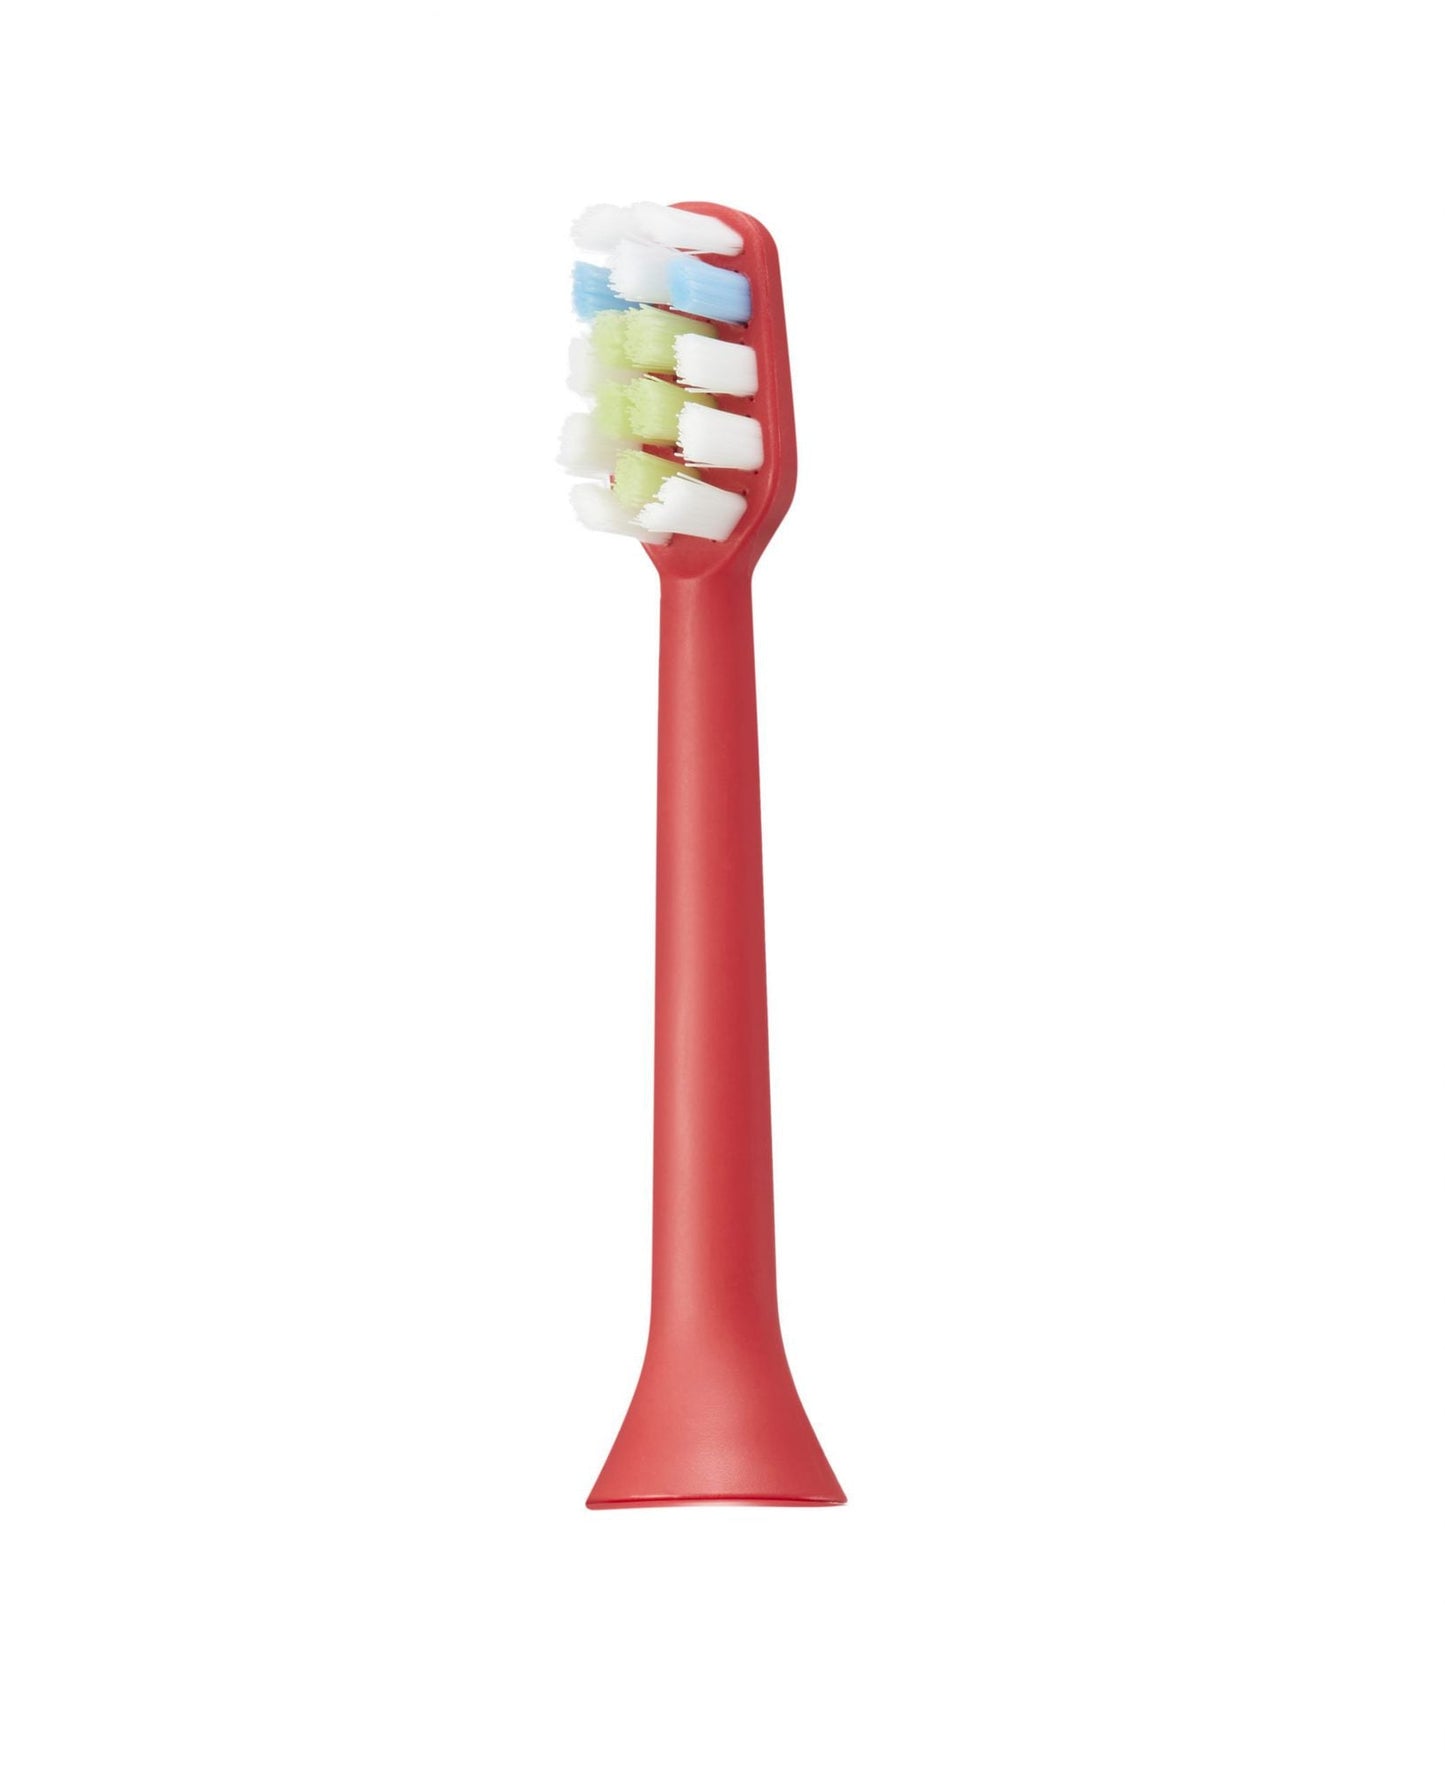 AQ - 102B Sonic Electric Toothbrush Replacement Brush Heads 4 pack